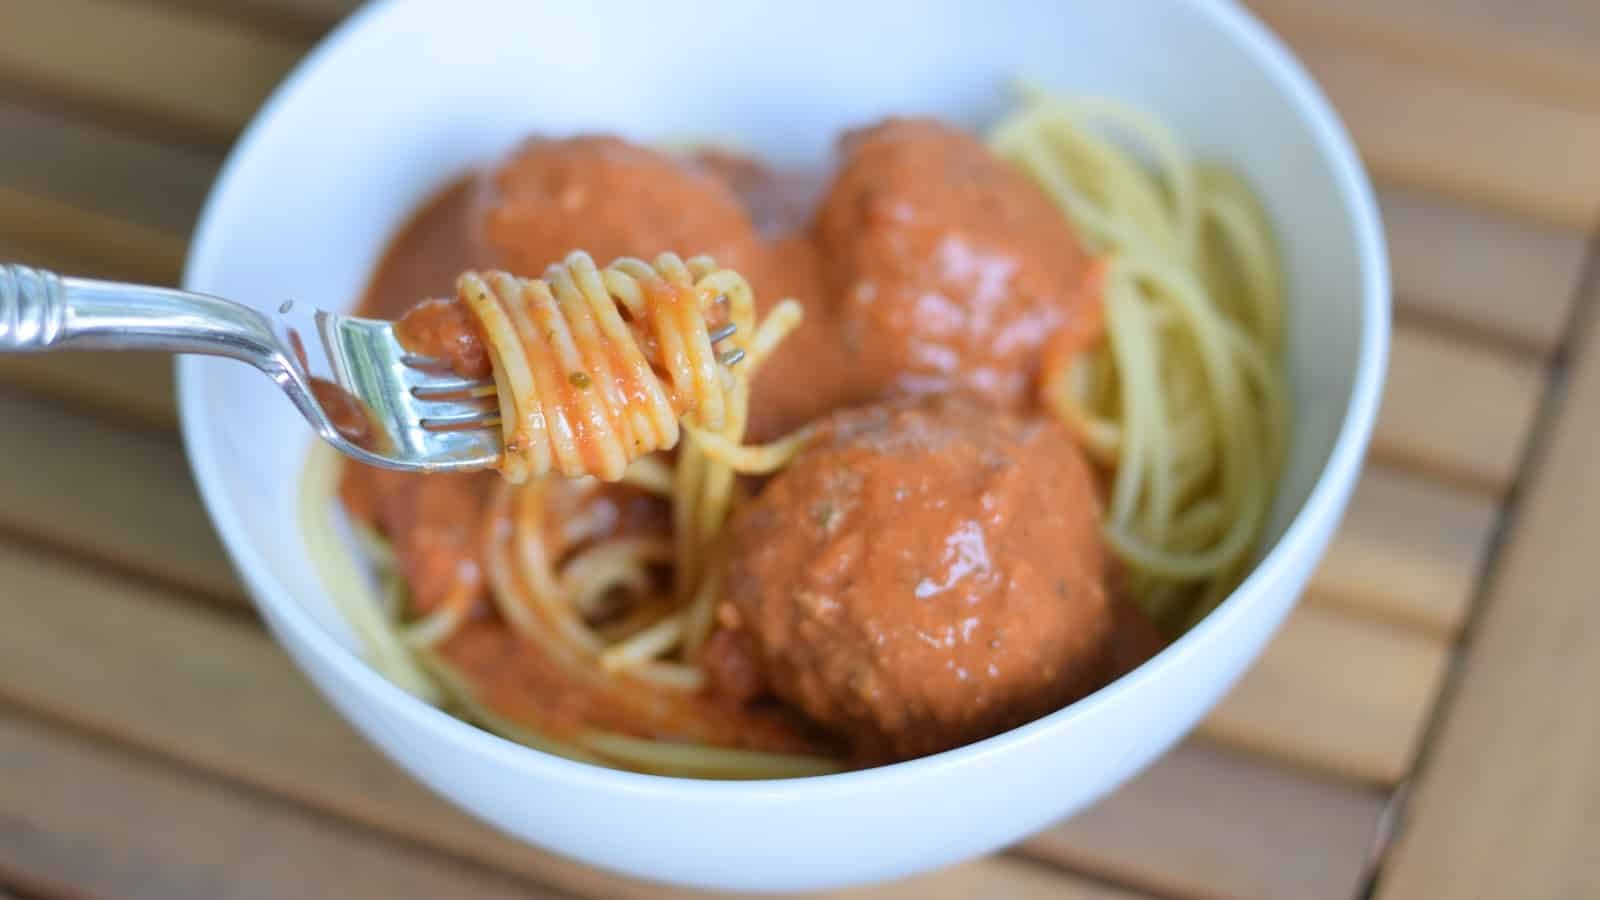 Image shows Spaghetti and meatballs with a fork twirling pasta in a white bowl.